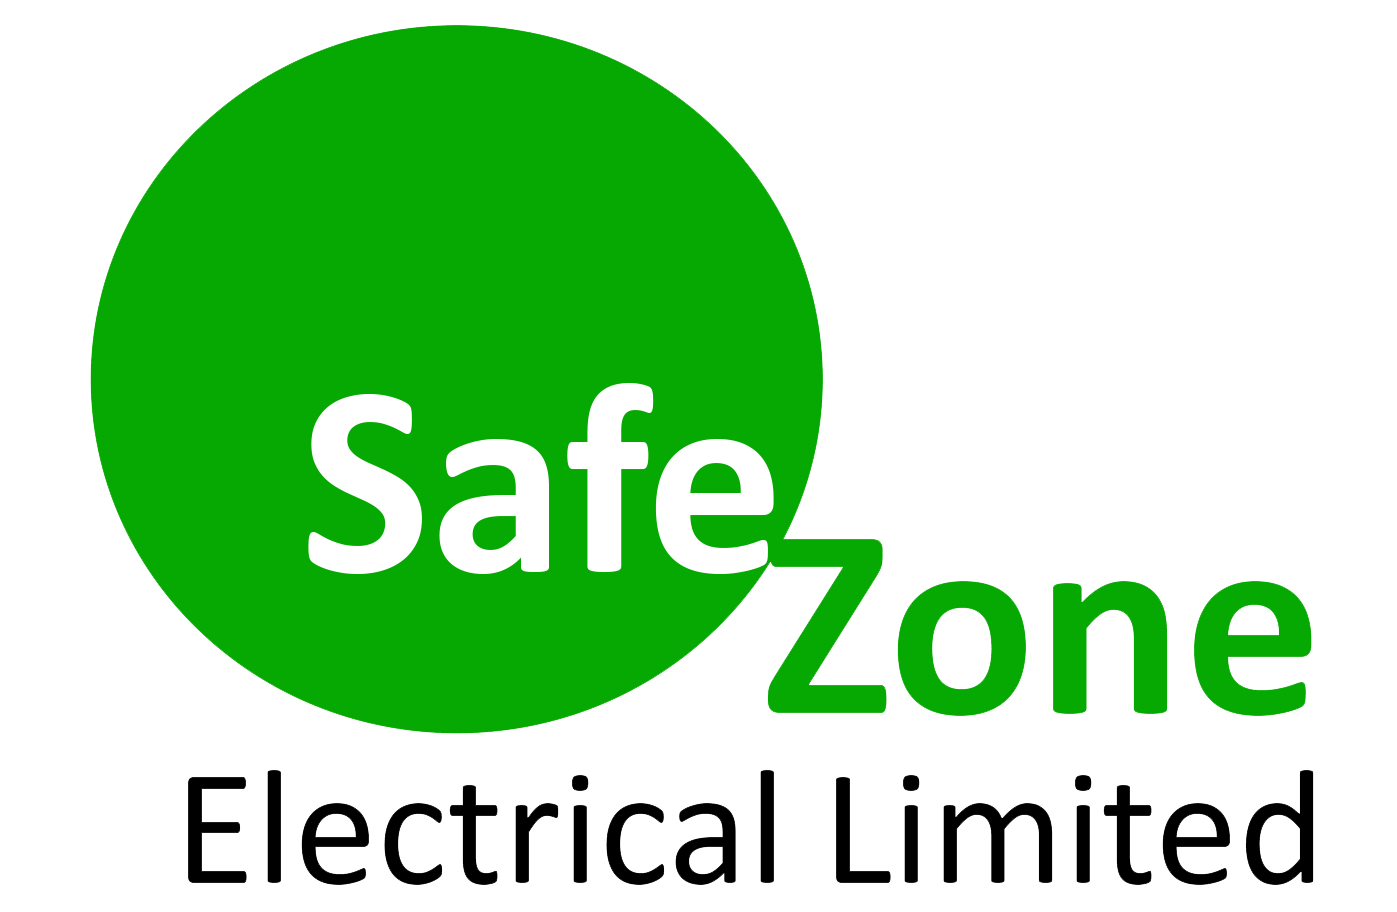 Safezone Electrical